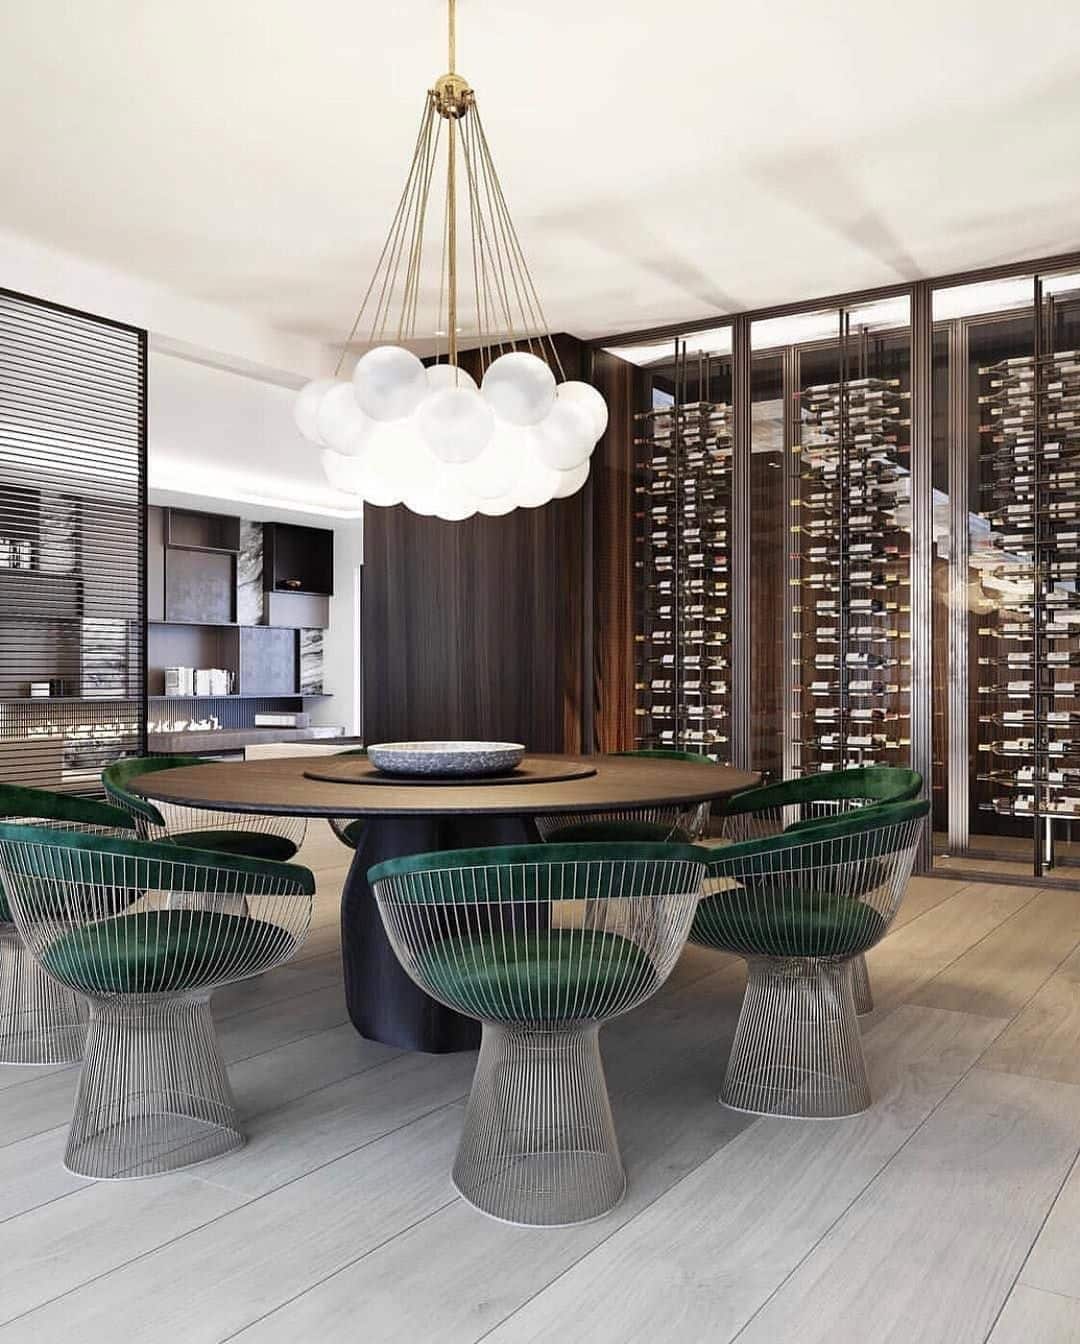 Gorgeous dining room designed with a wine wall display as a backdrop ...